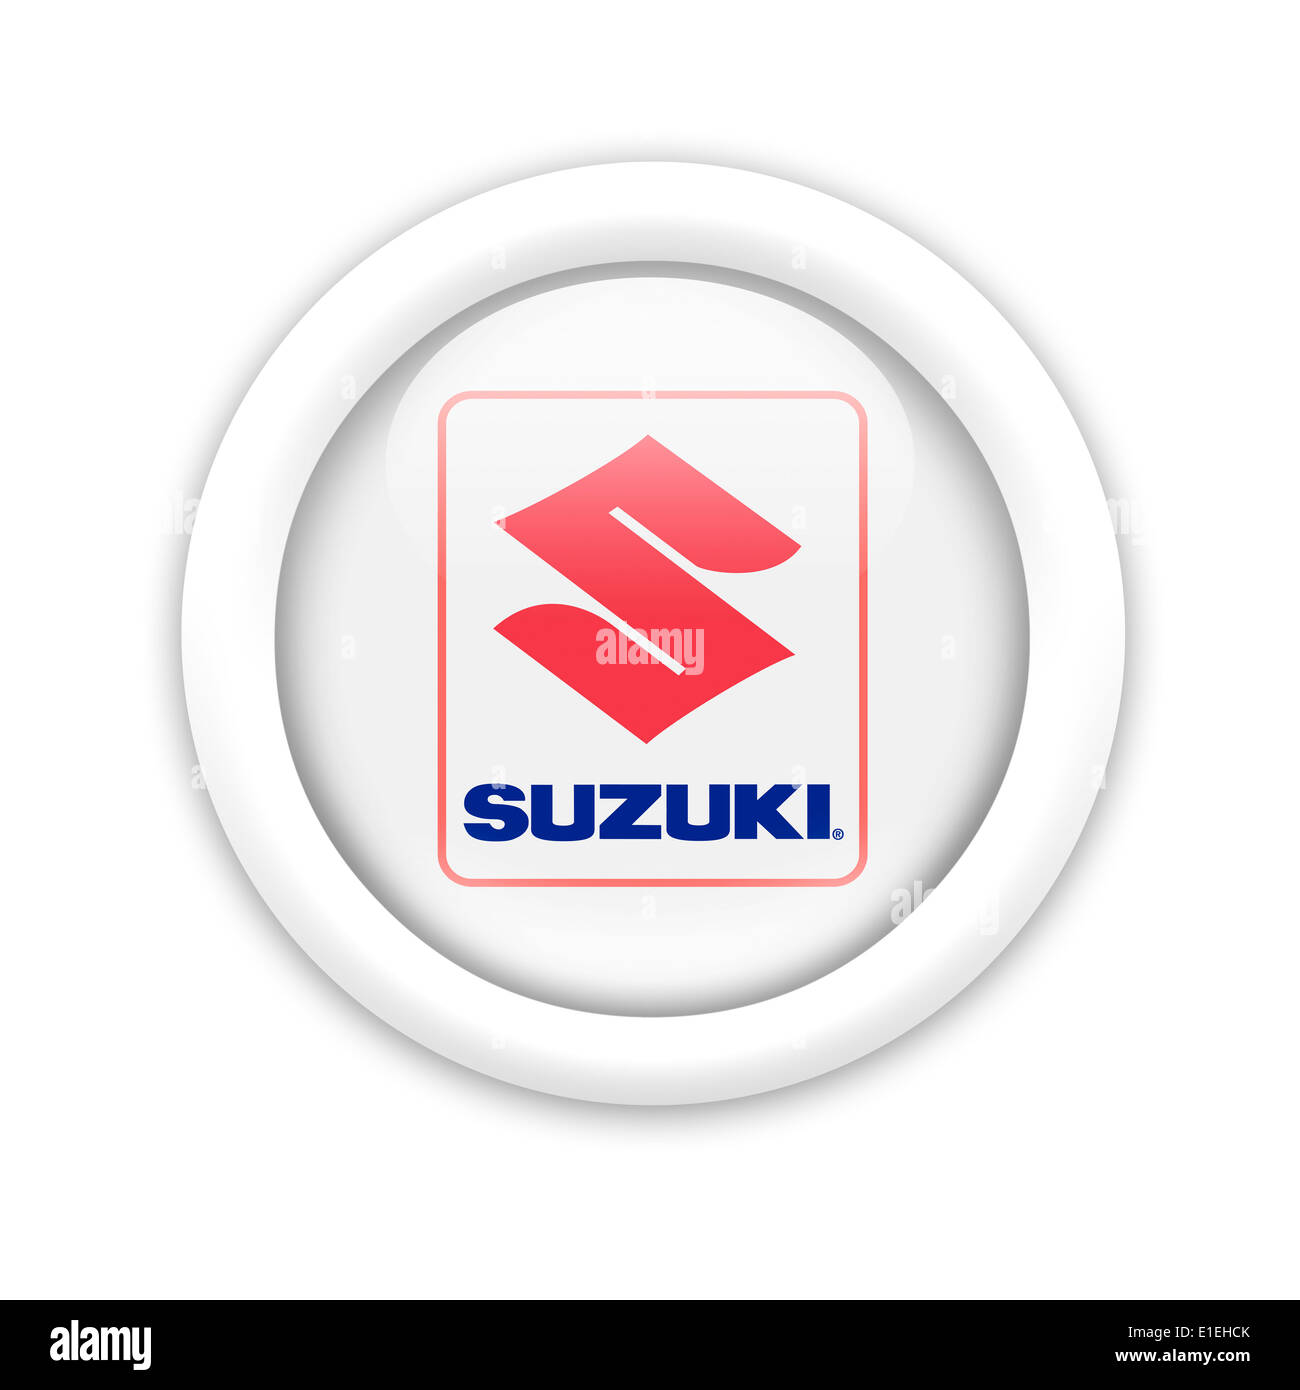 Suzuki logo Cut Out Stock Images & Pictures - Alamy